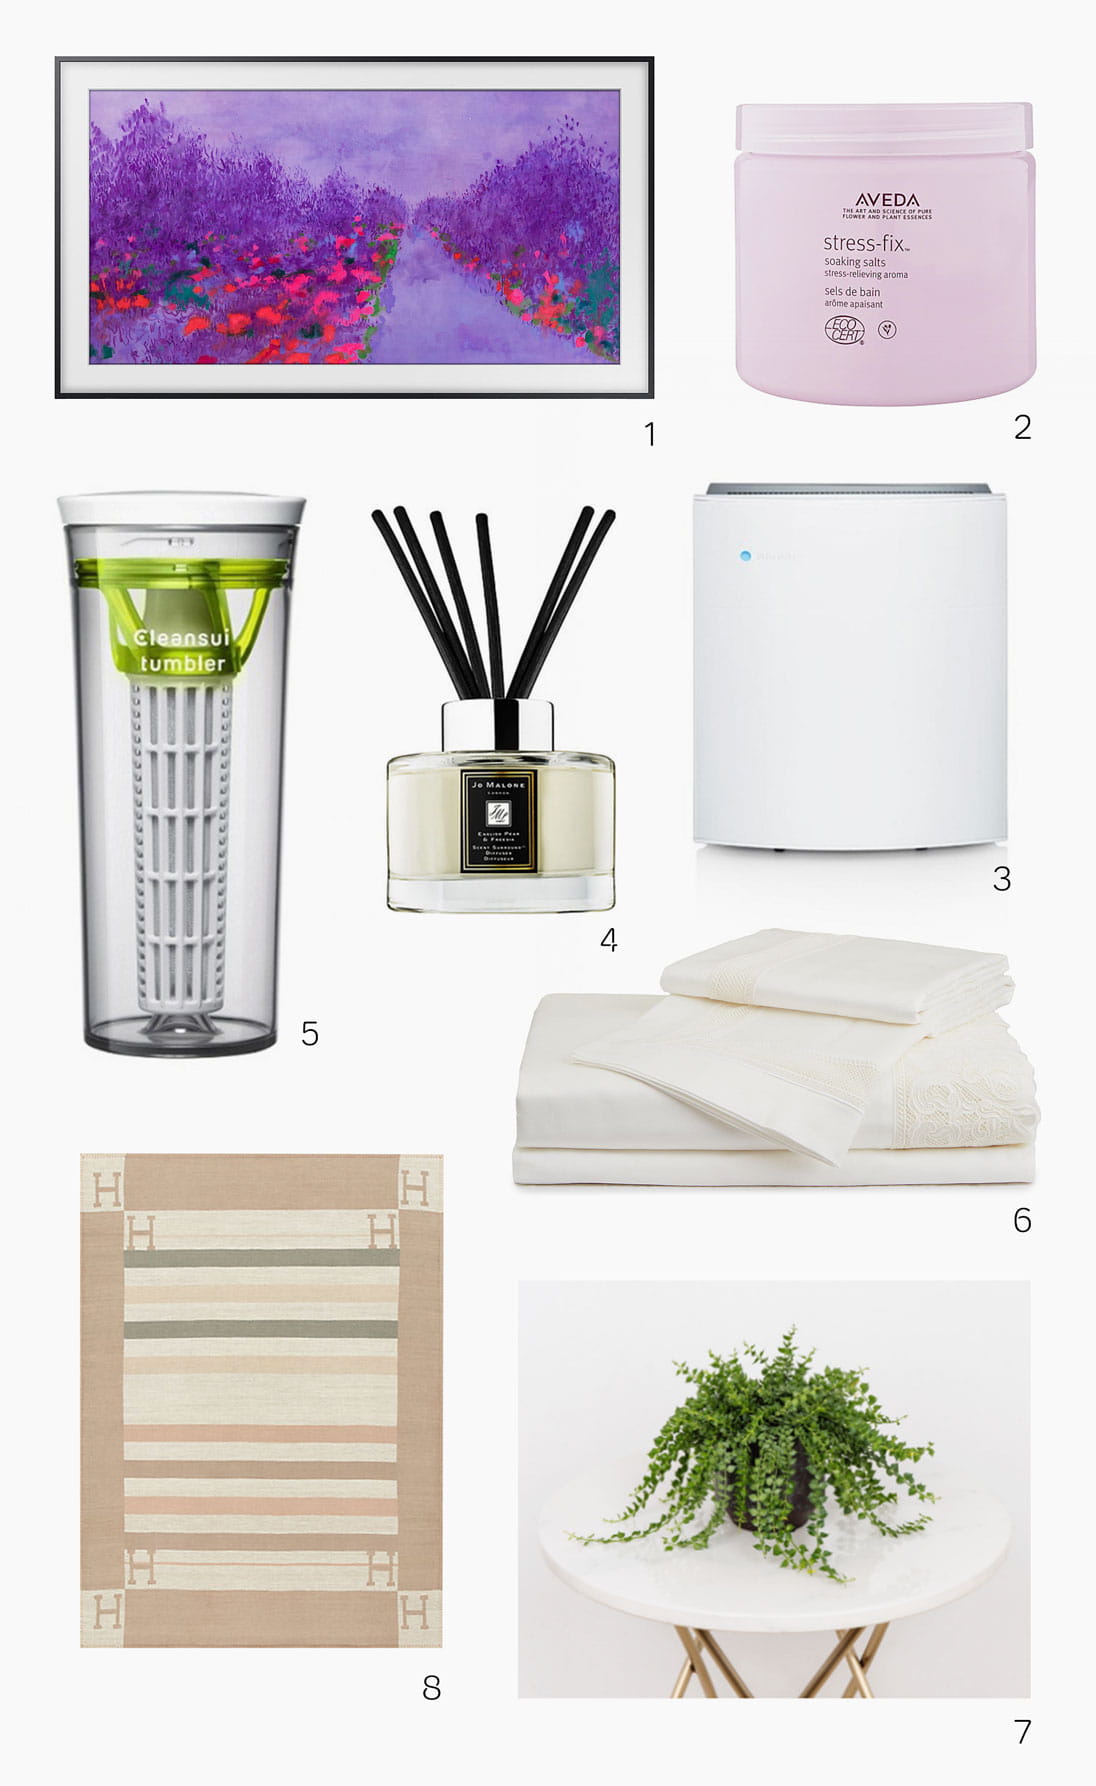 Home wellness products from Samsung, Hermès, Jo Malone, Ellermann, Cleansui, Blueair, Aveda and Frette